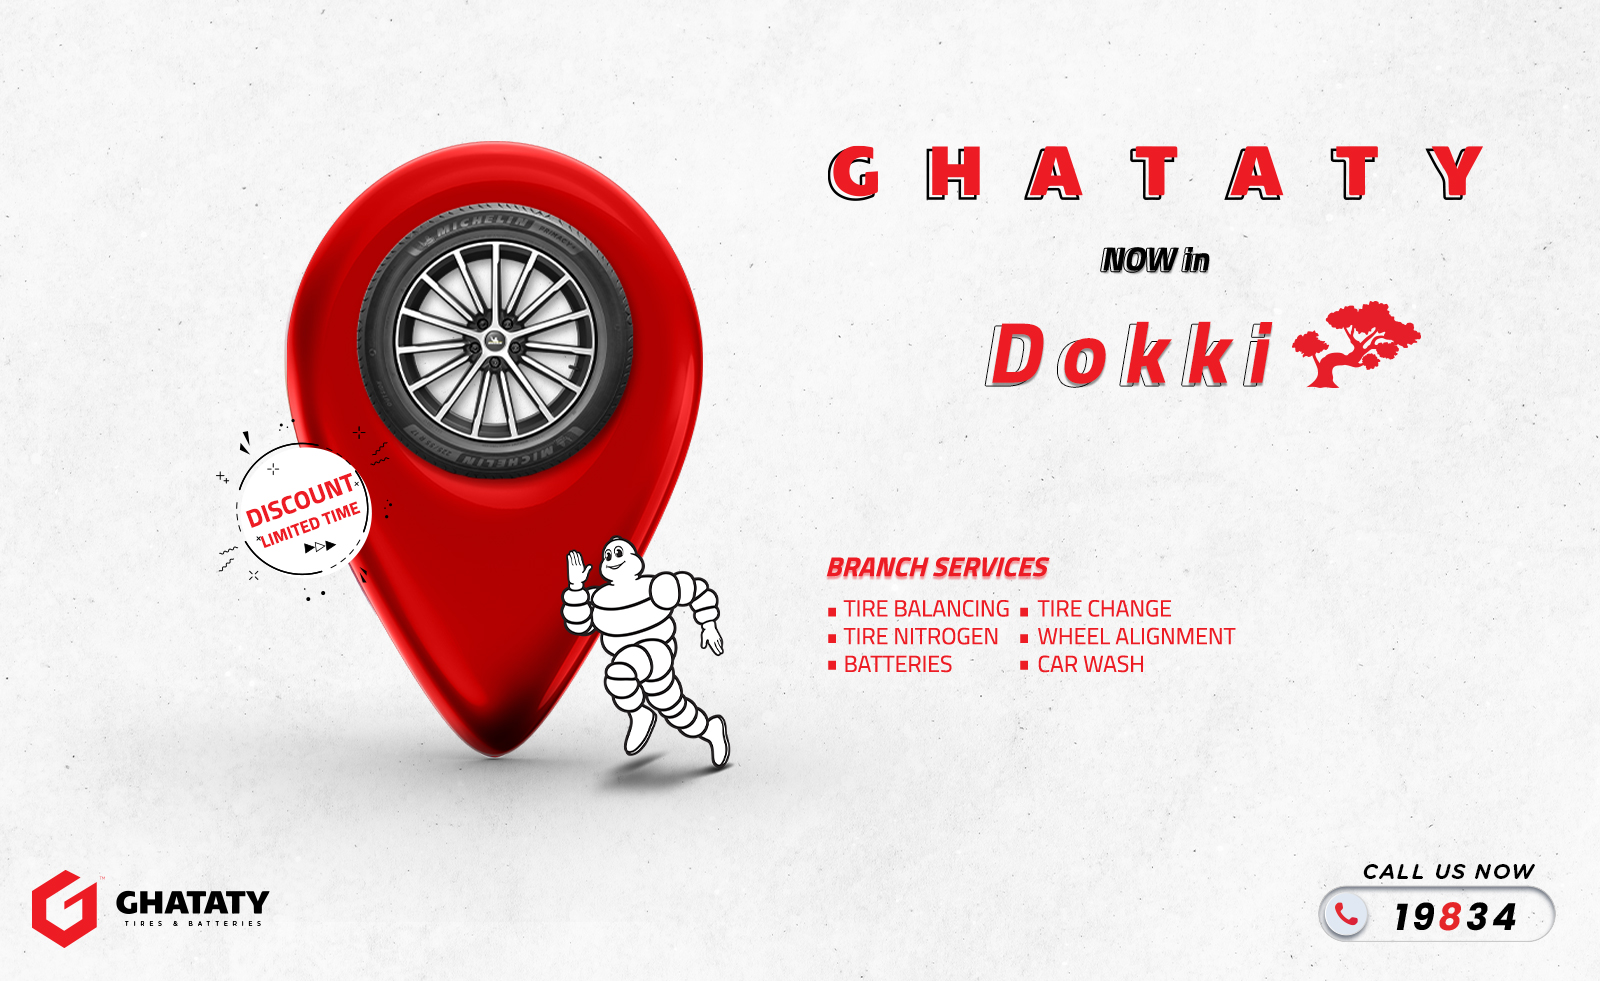 Ghataty for Tires and Batteries Opens A New Branch At Dokki